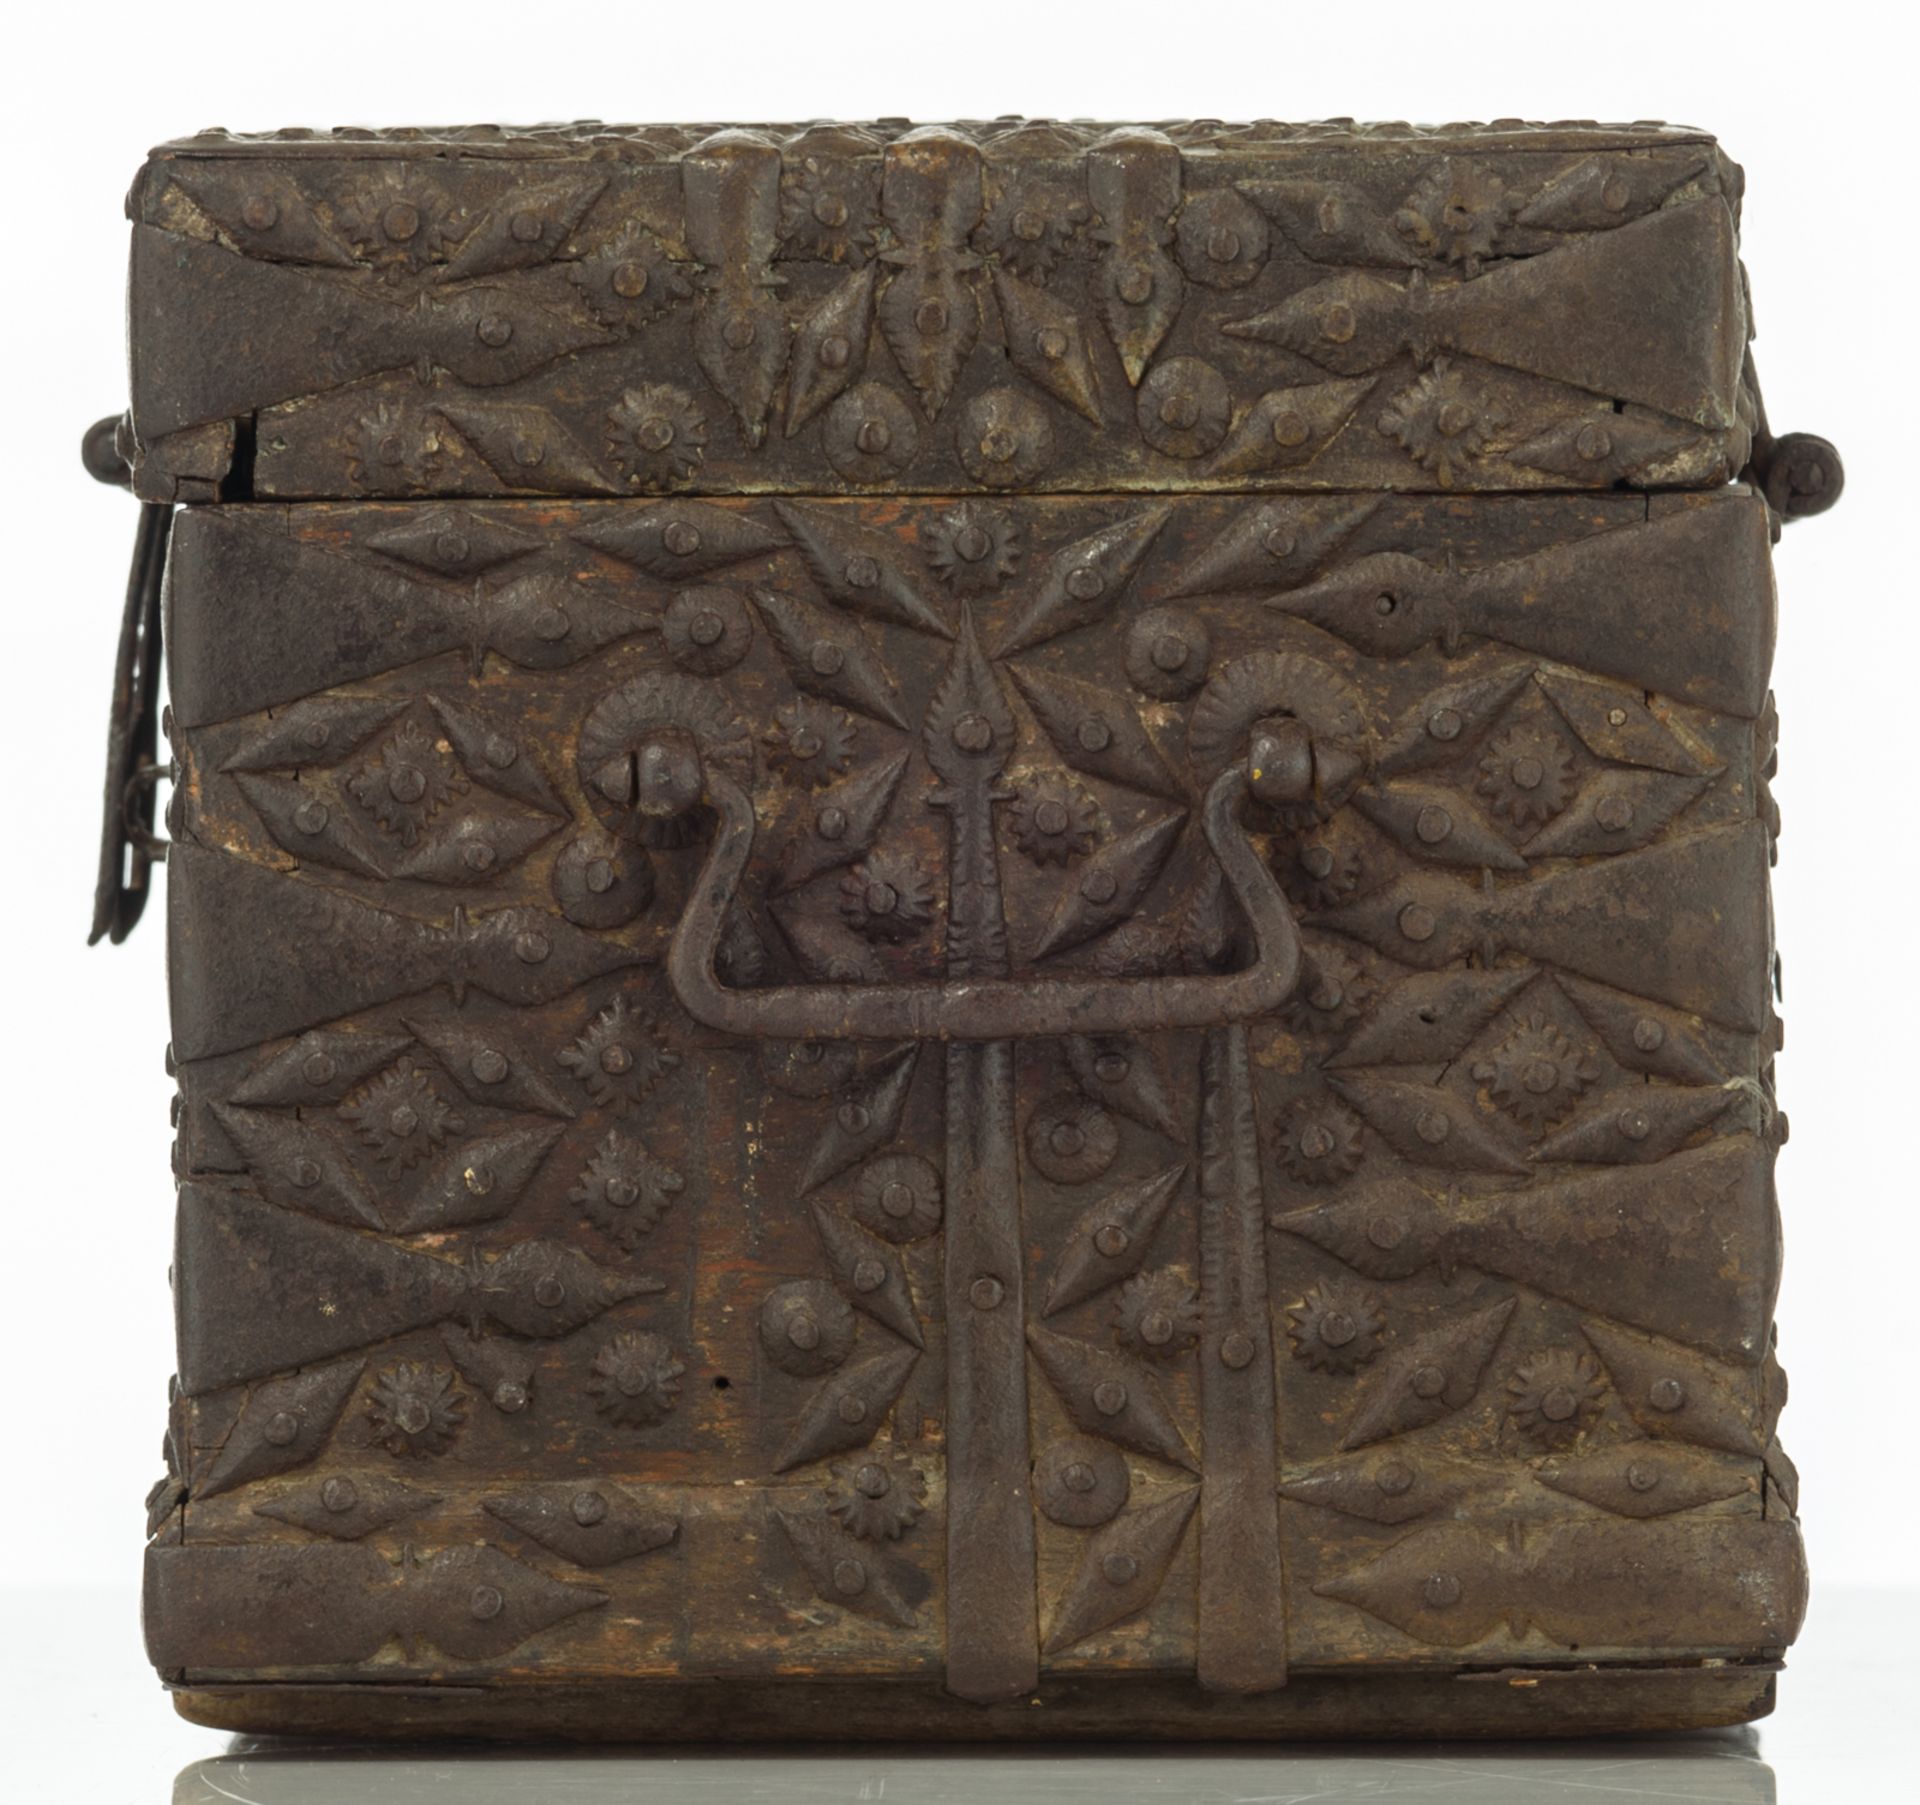 A Middle Eastern wooden chest with wrought iron fittings, H 20,5 - W 37 - D 20,5 cm - Image 3 of 8